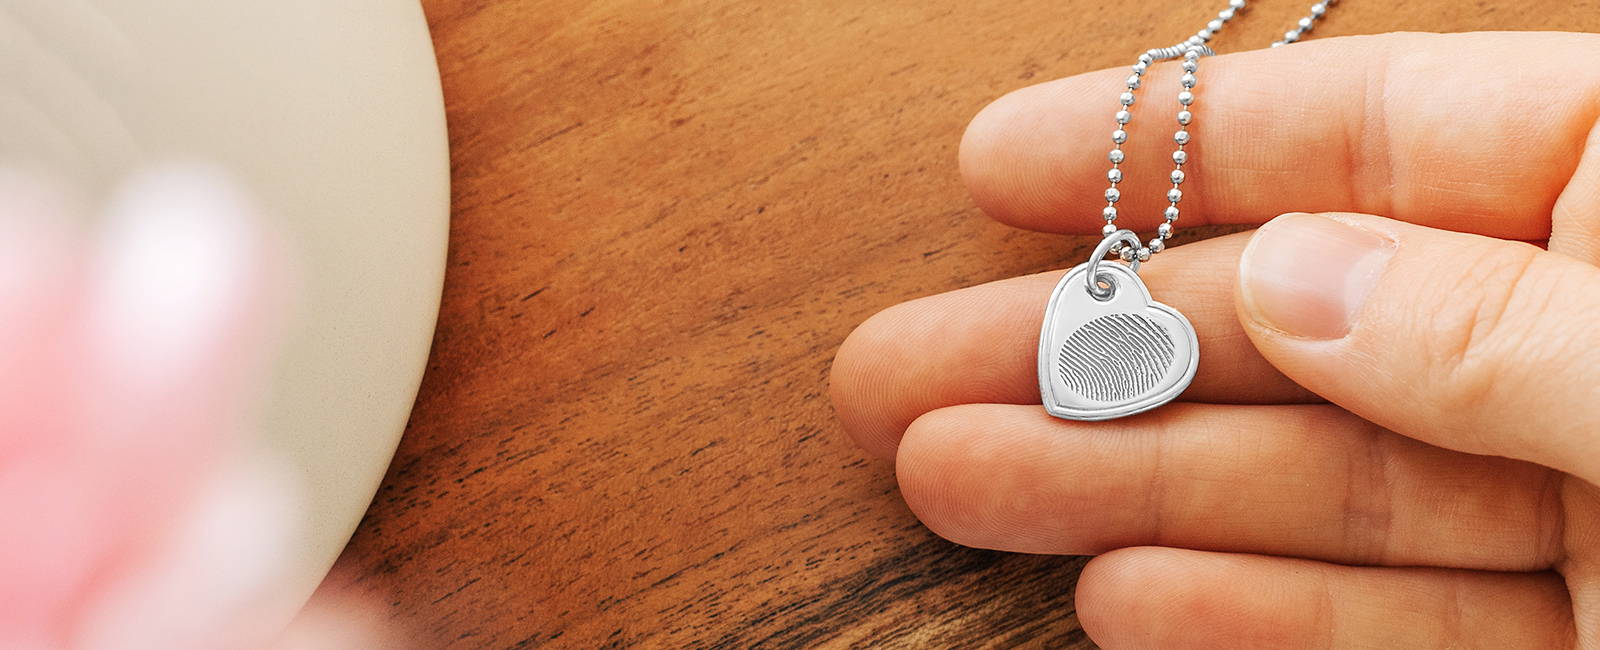 person holding a sterling silver heart charm fingerprint necklace